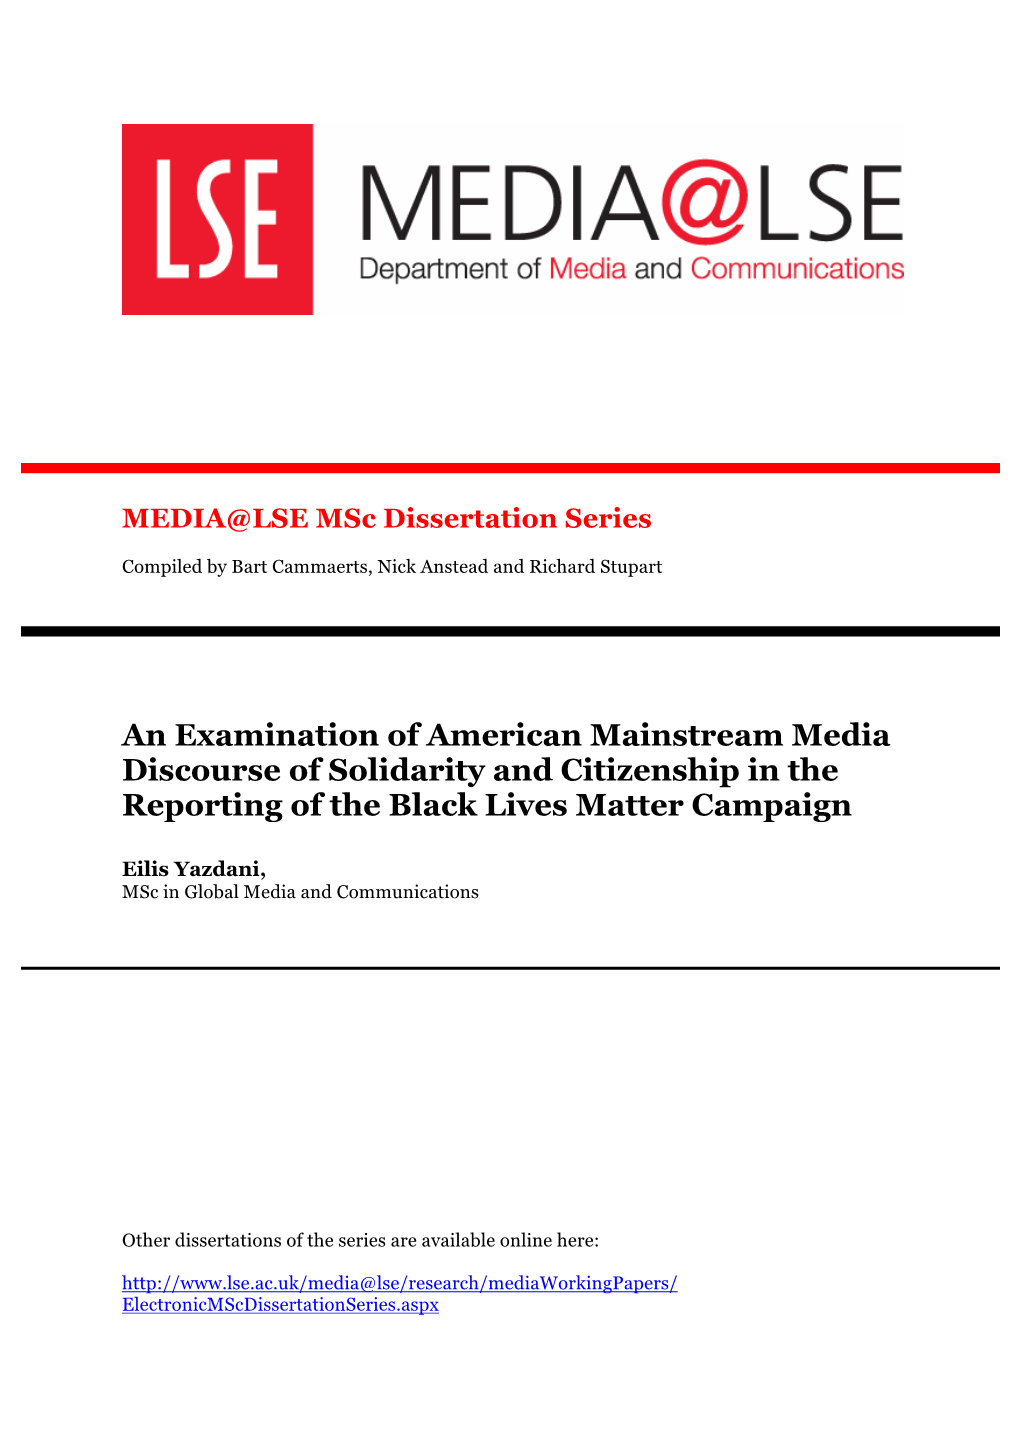 An Examination of American Mainstream Media Discourse of Solidarity and Citizenship in the Reporting of the Black Lives Matter Campaign